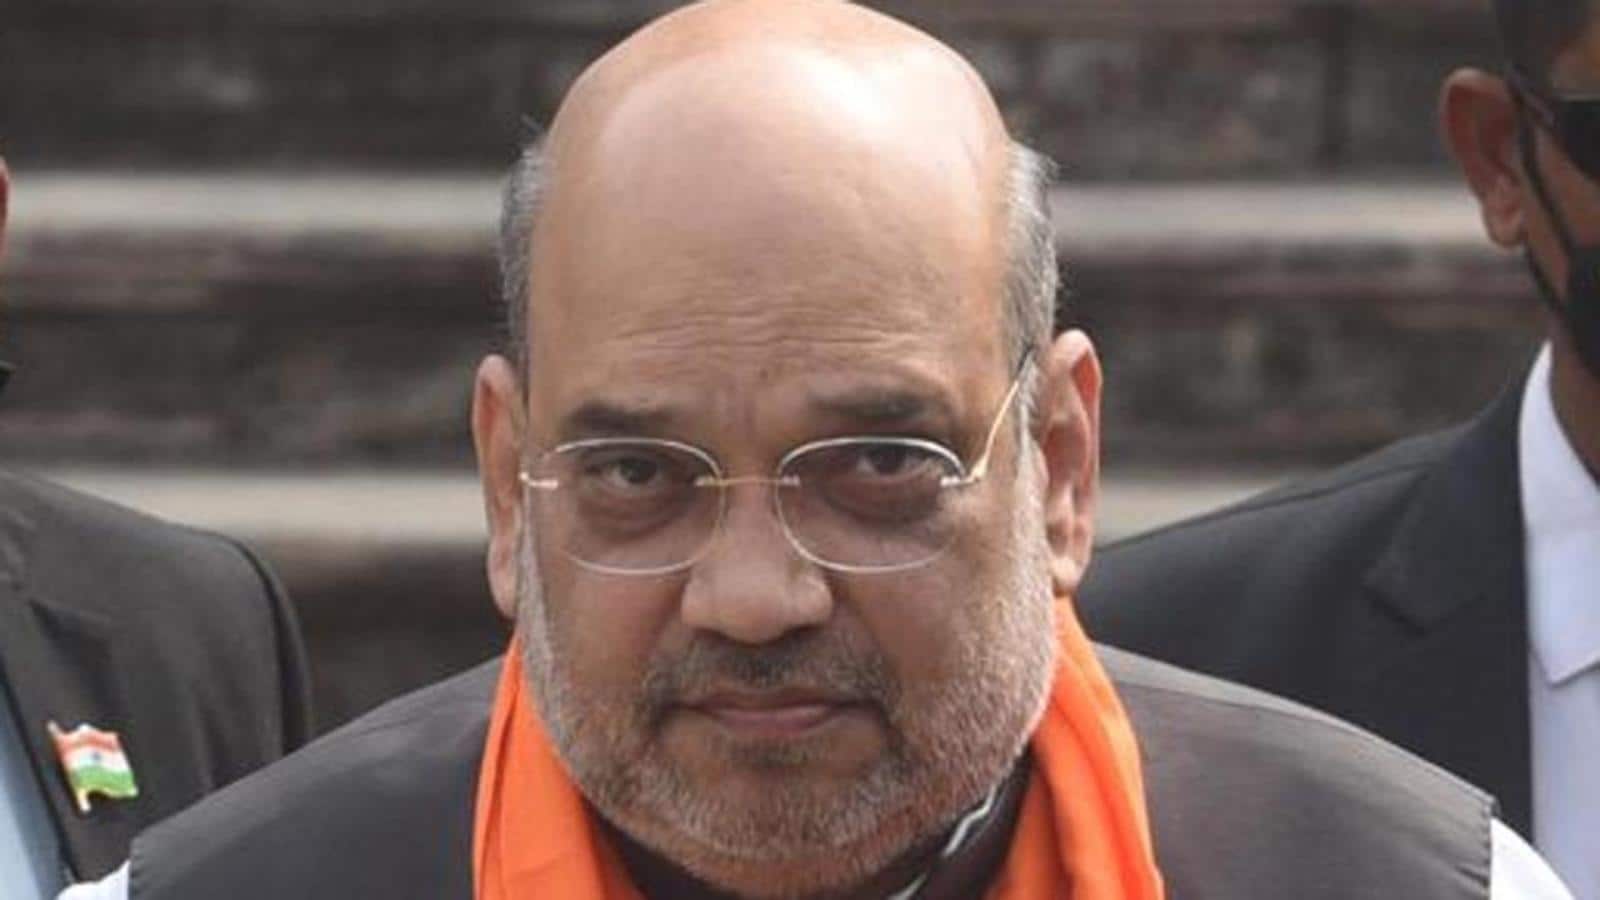 Indigenous counter-drone technology very soon: Shah - Hindustan Times